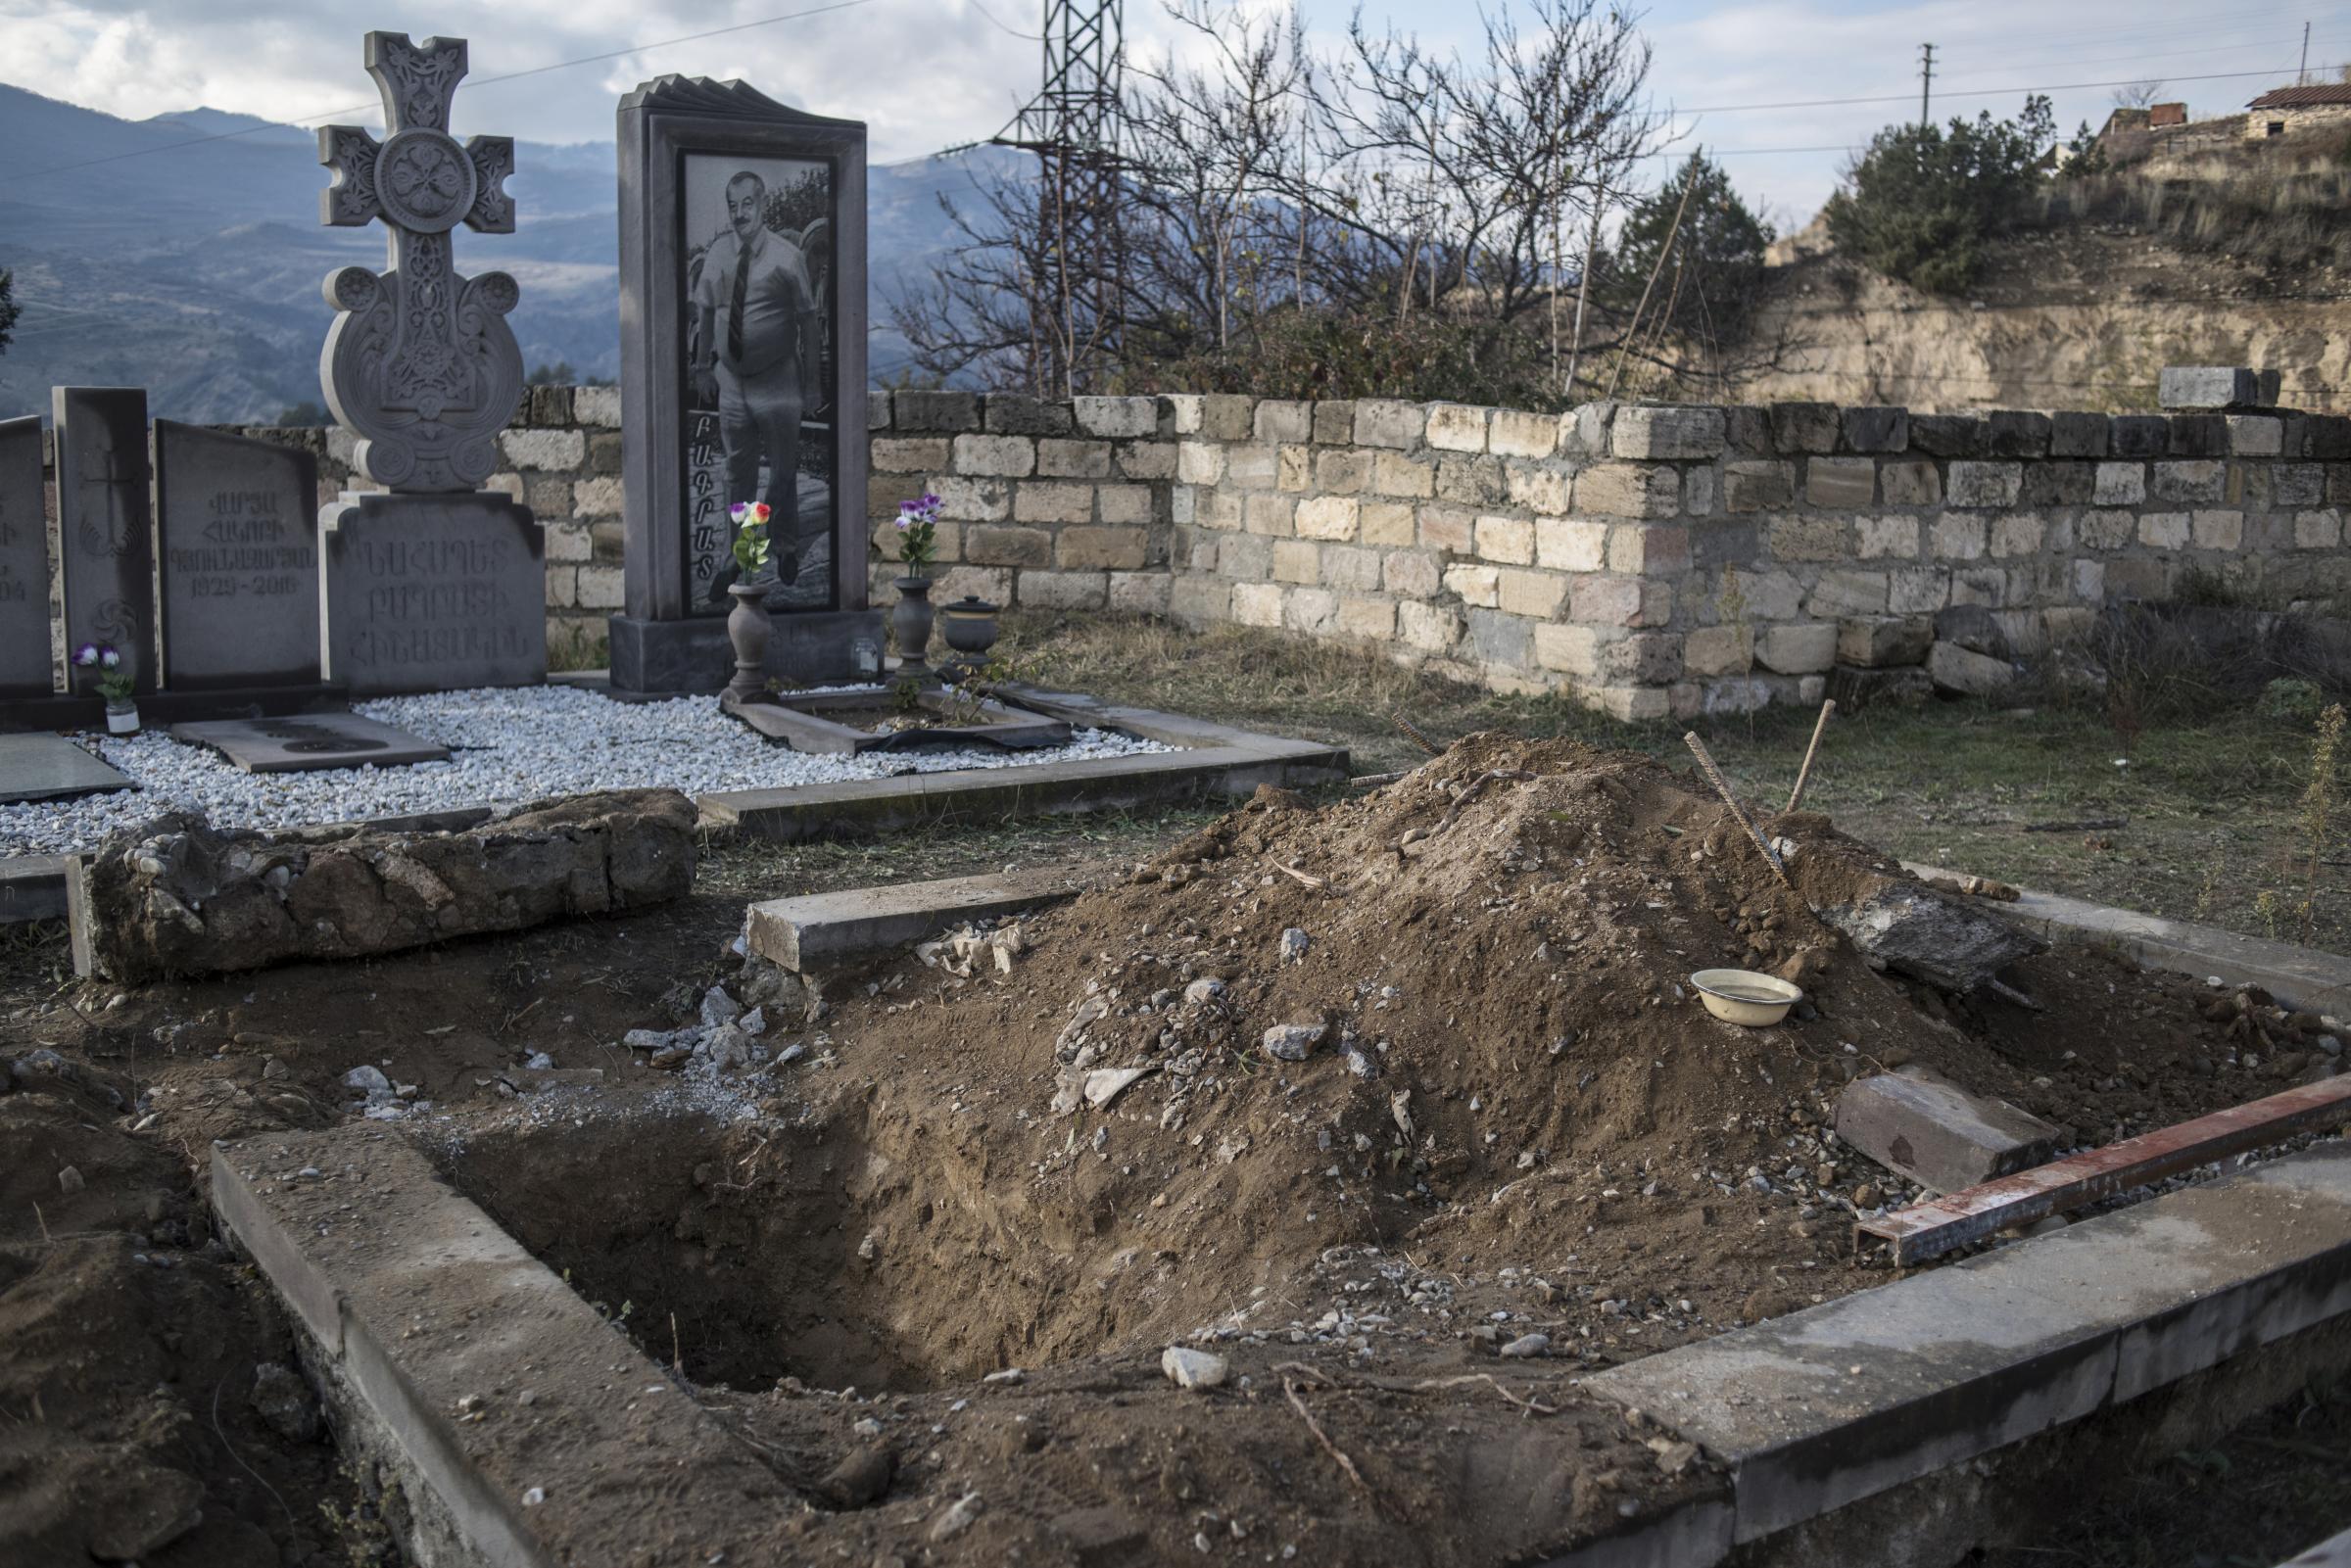 Paradise Lost - During the conflict in Nagorno-Karabakh more than four thousand people were killed. A grave that...